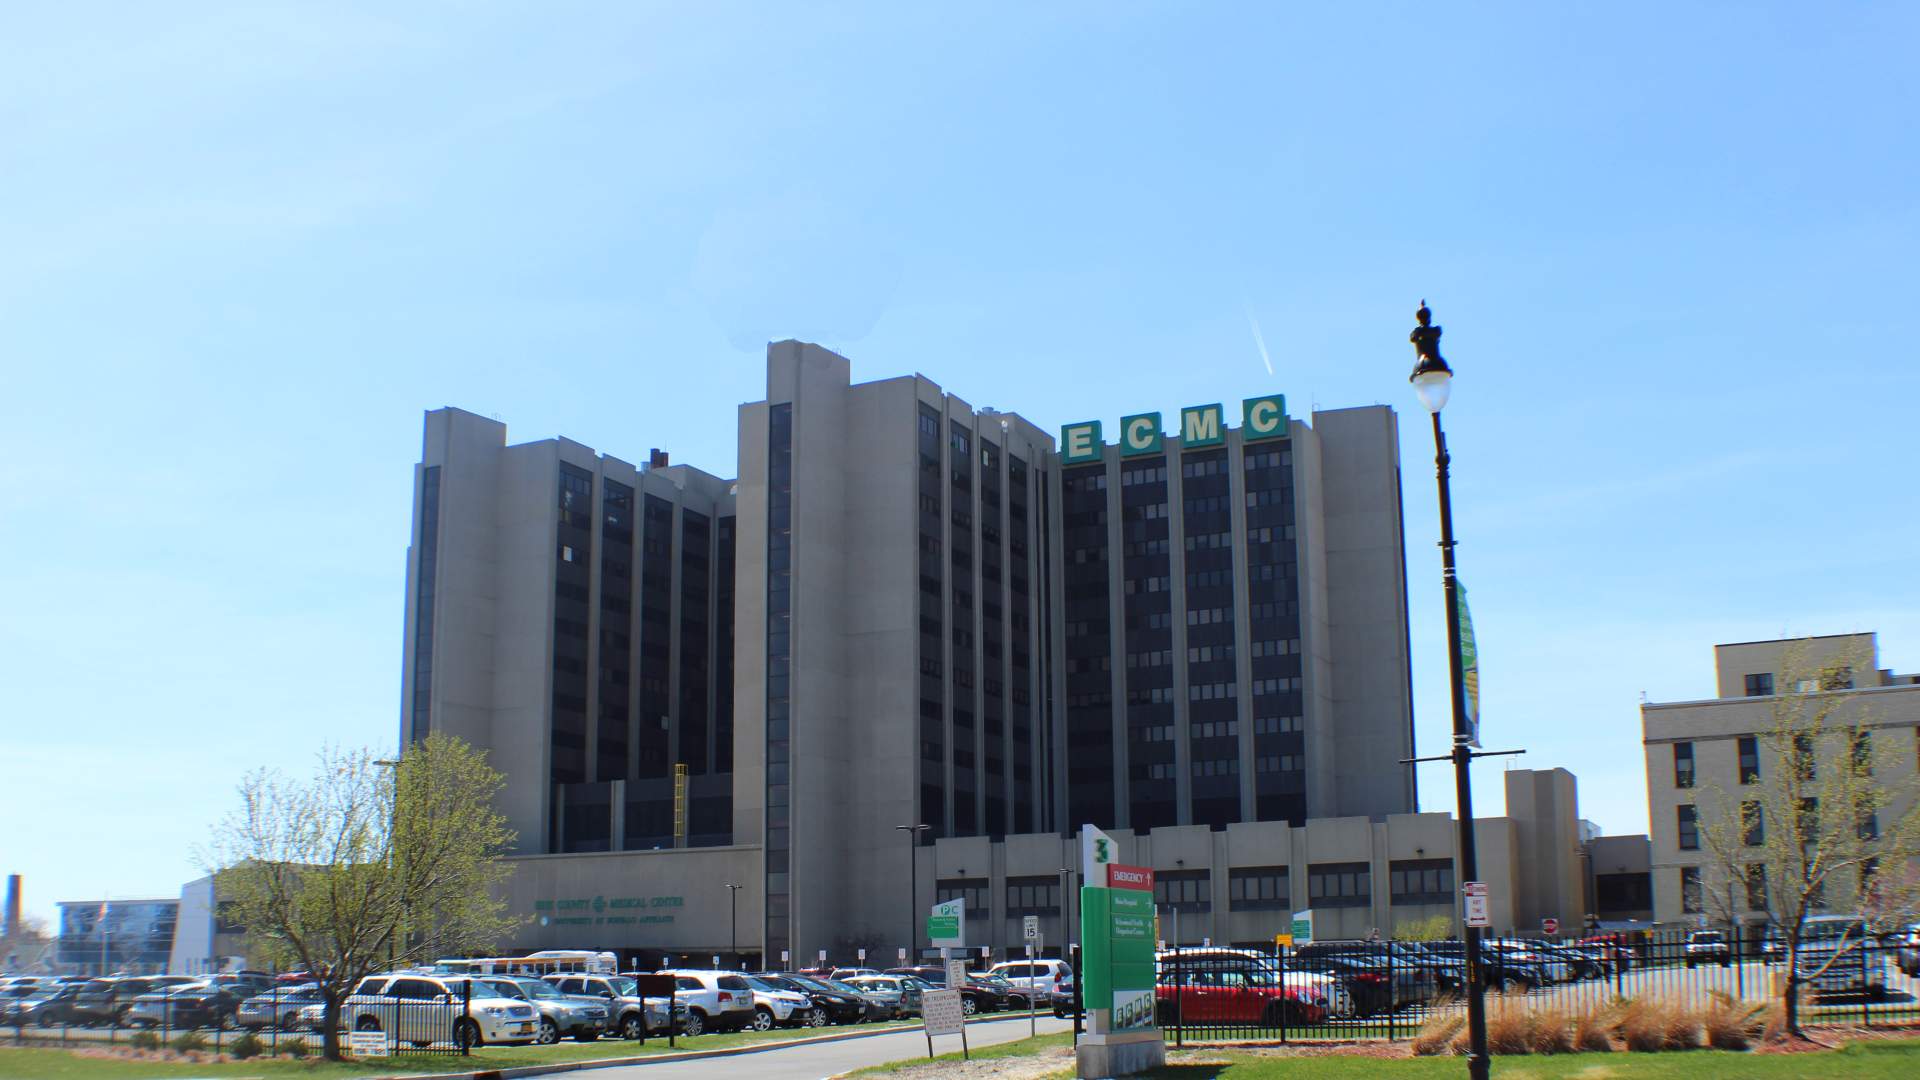 Erie County Medical Center, Russell J. Salvatore Orthopaedic Unit